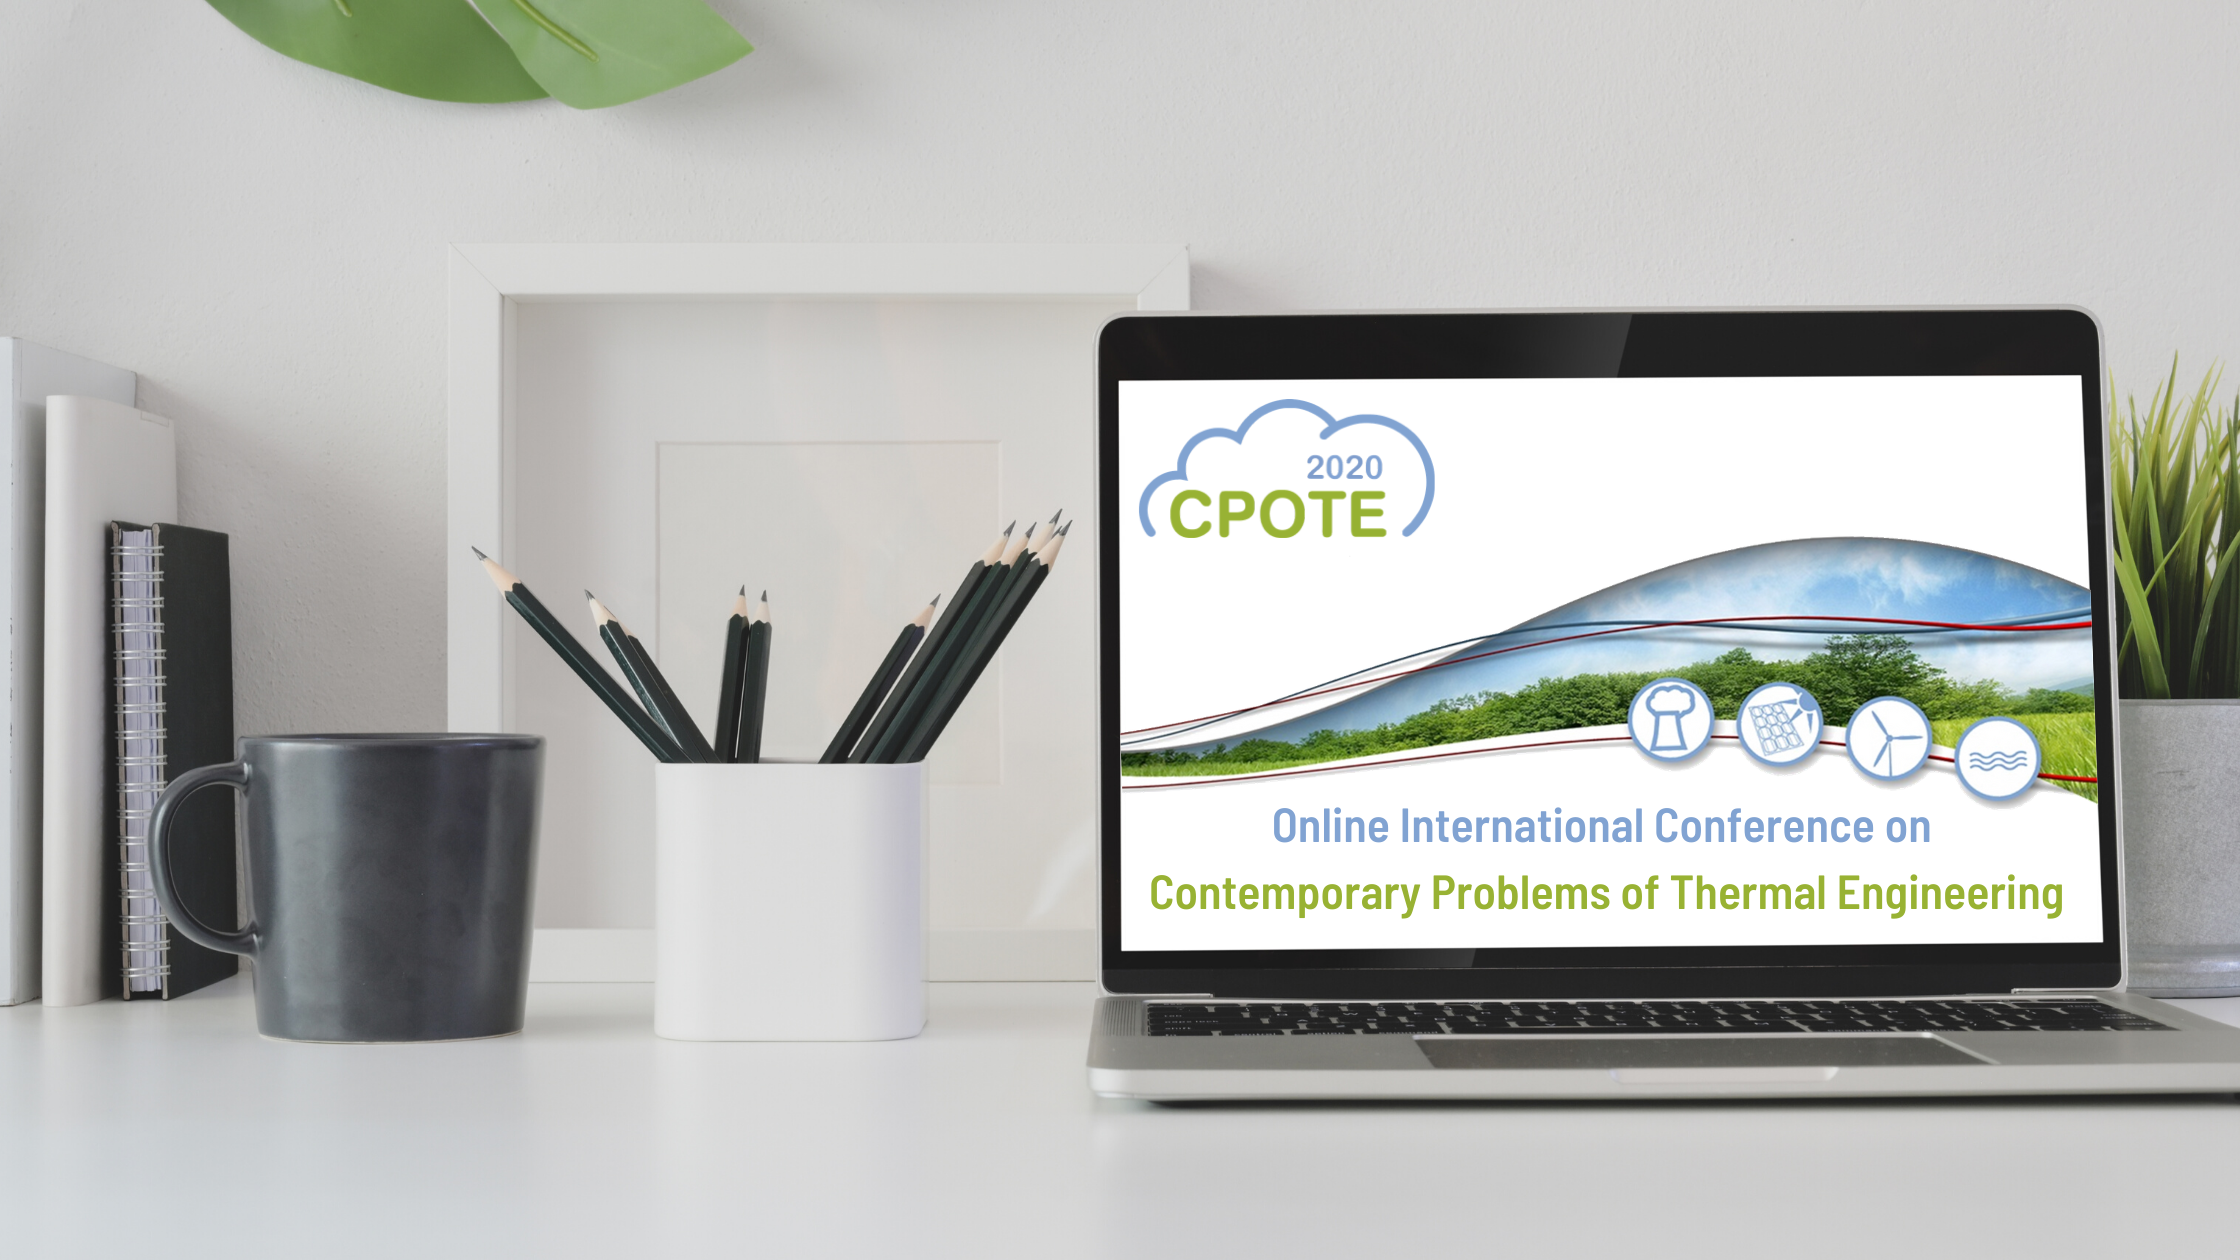 CPOTE 2020 Online